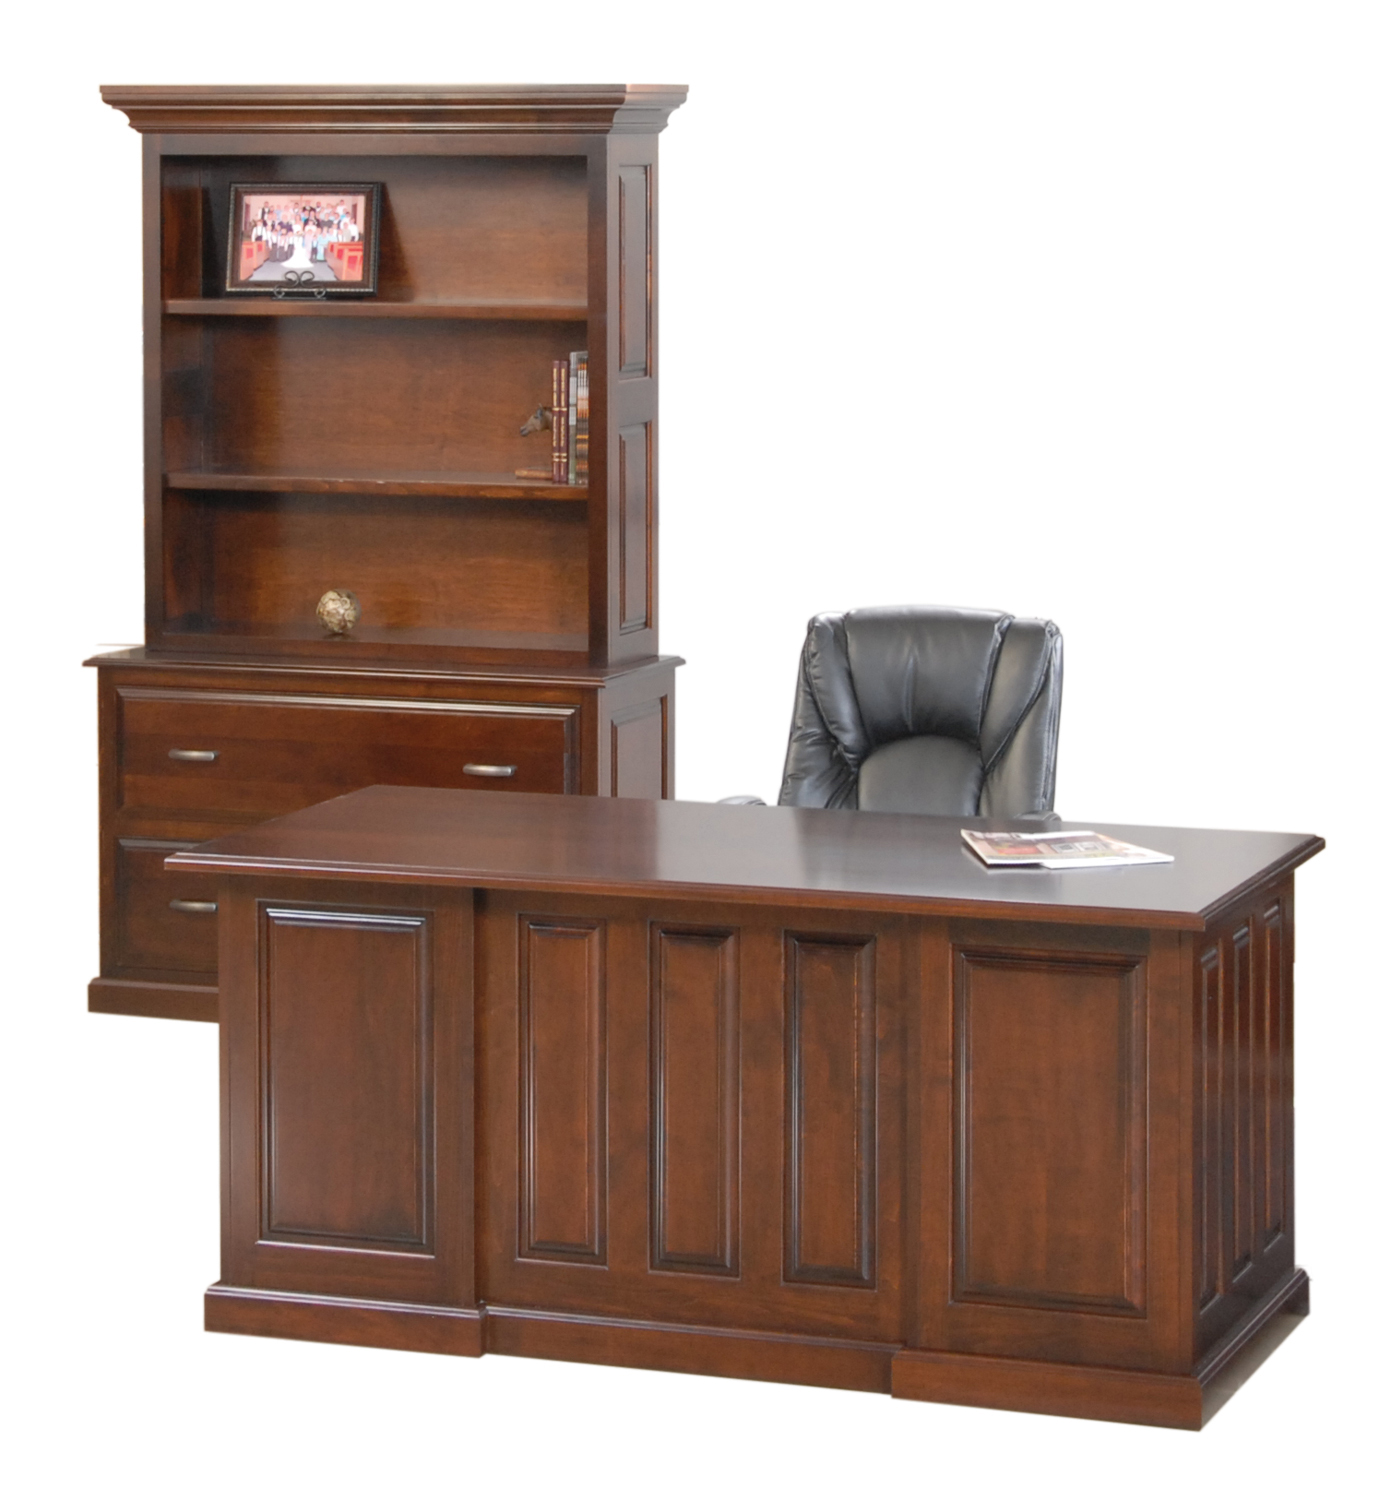 Newport Executive Office Furniture Collection